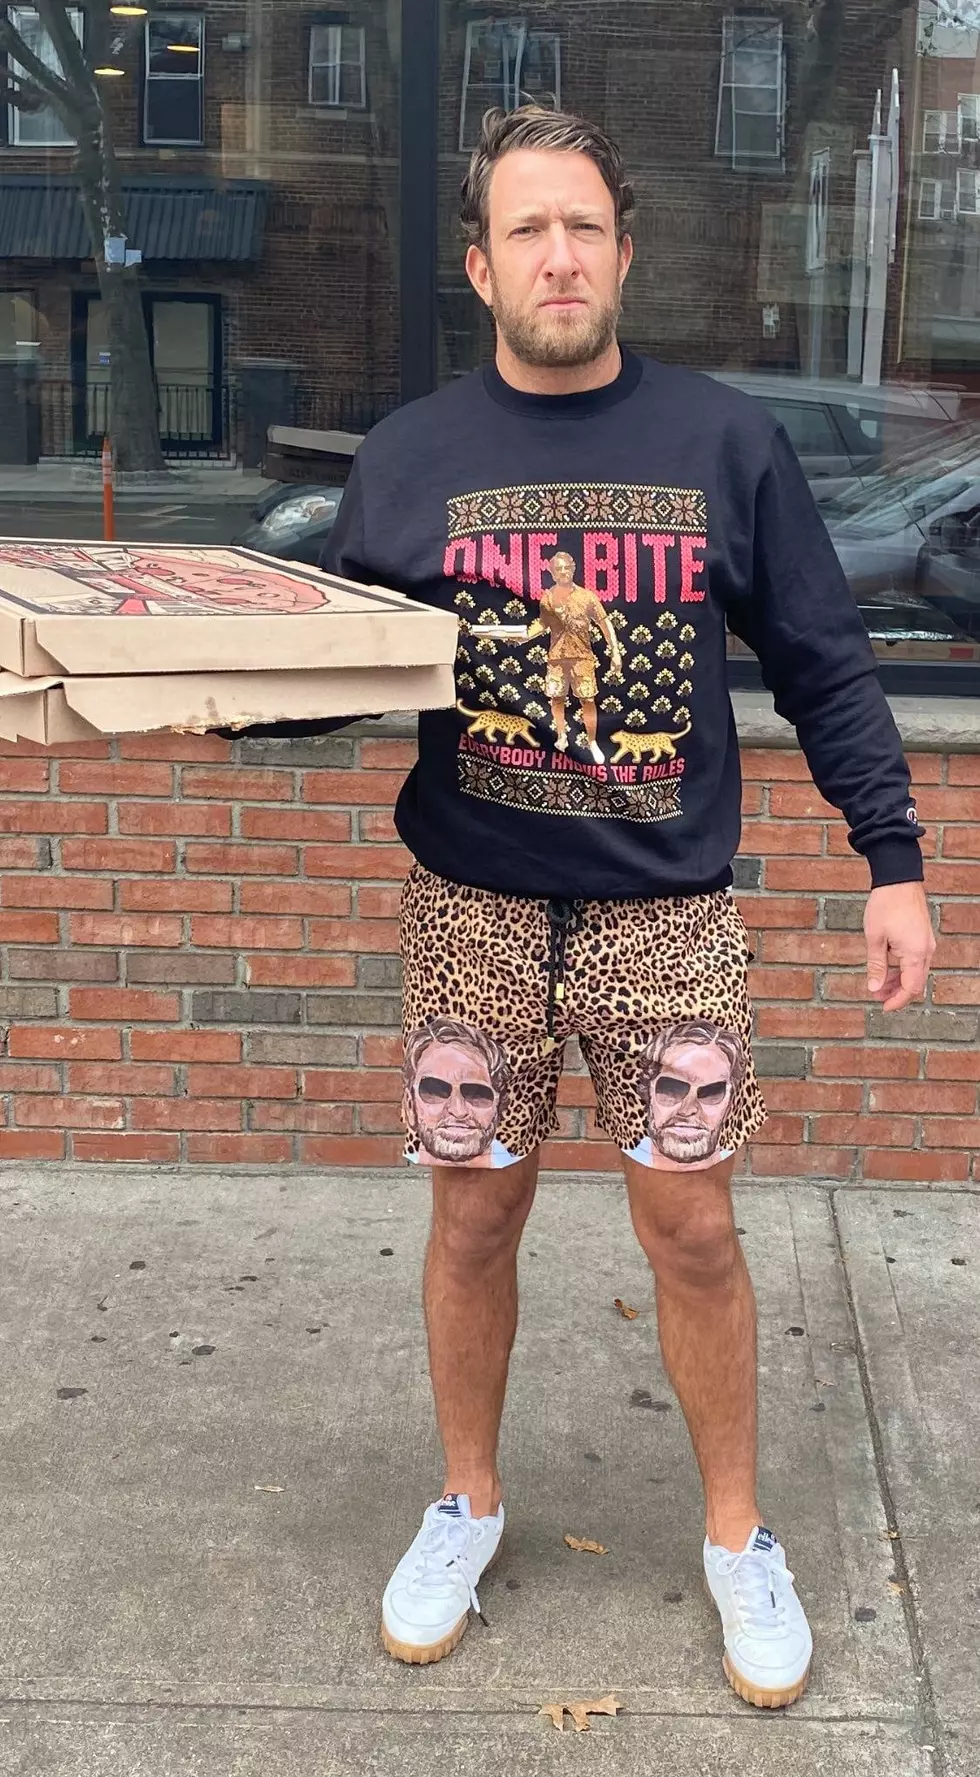 Barstool's Dave Portnoy Hates This MA Restaurant and Here's Why 